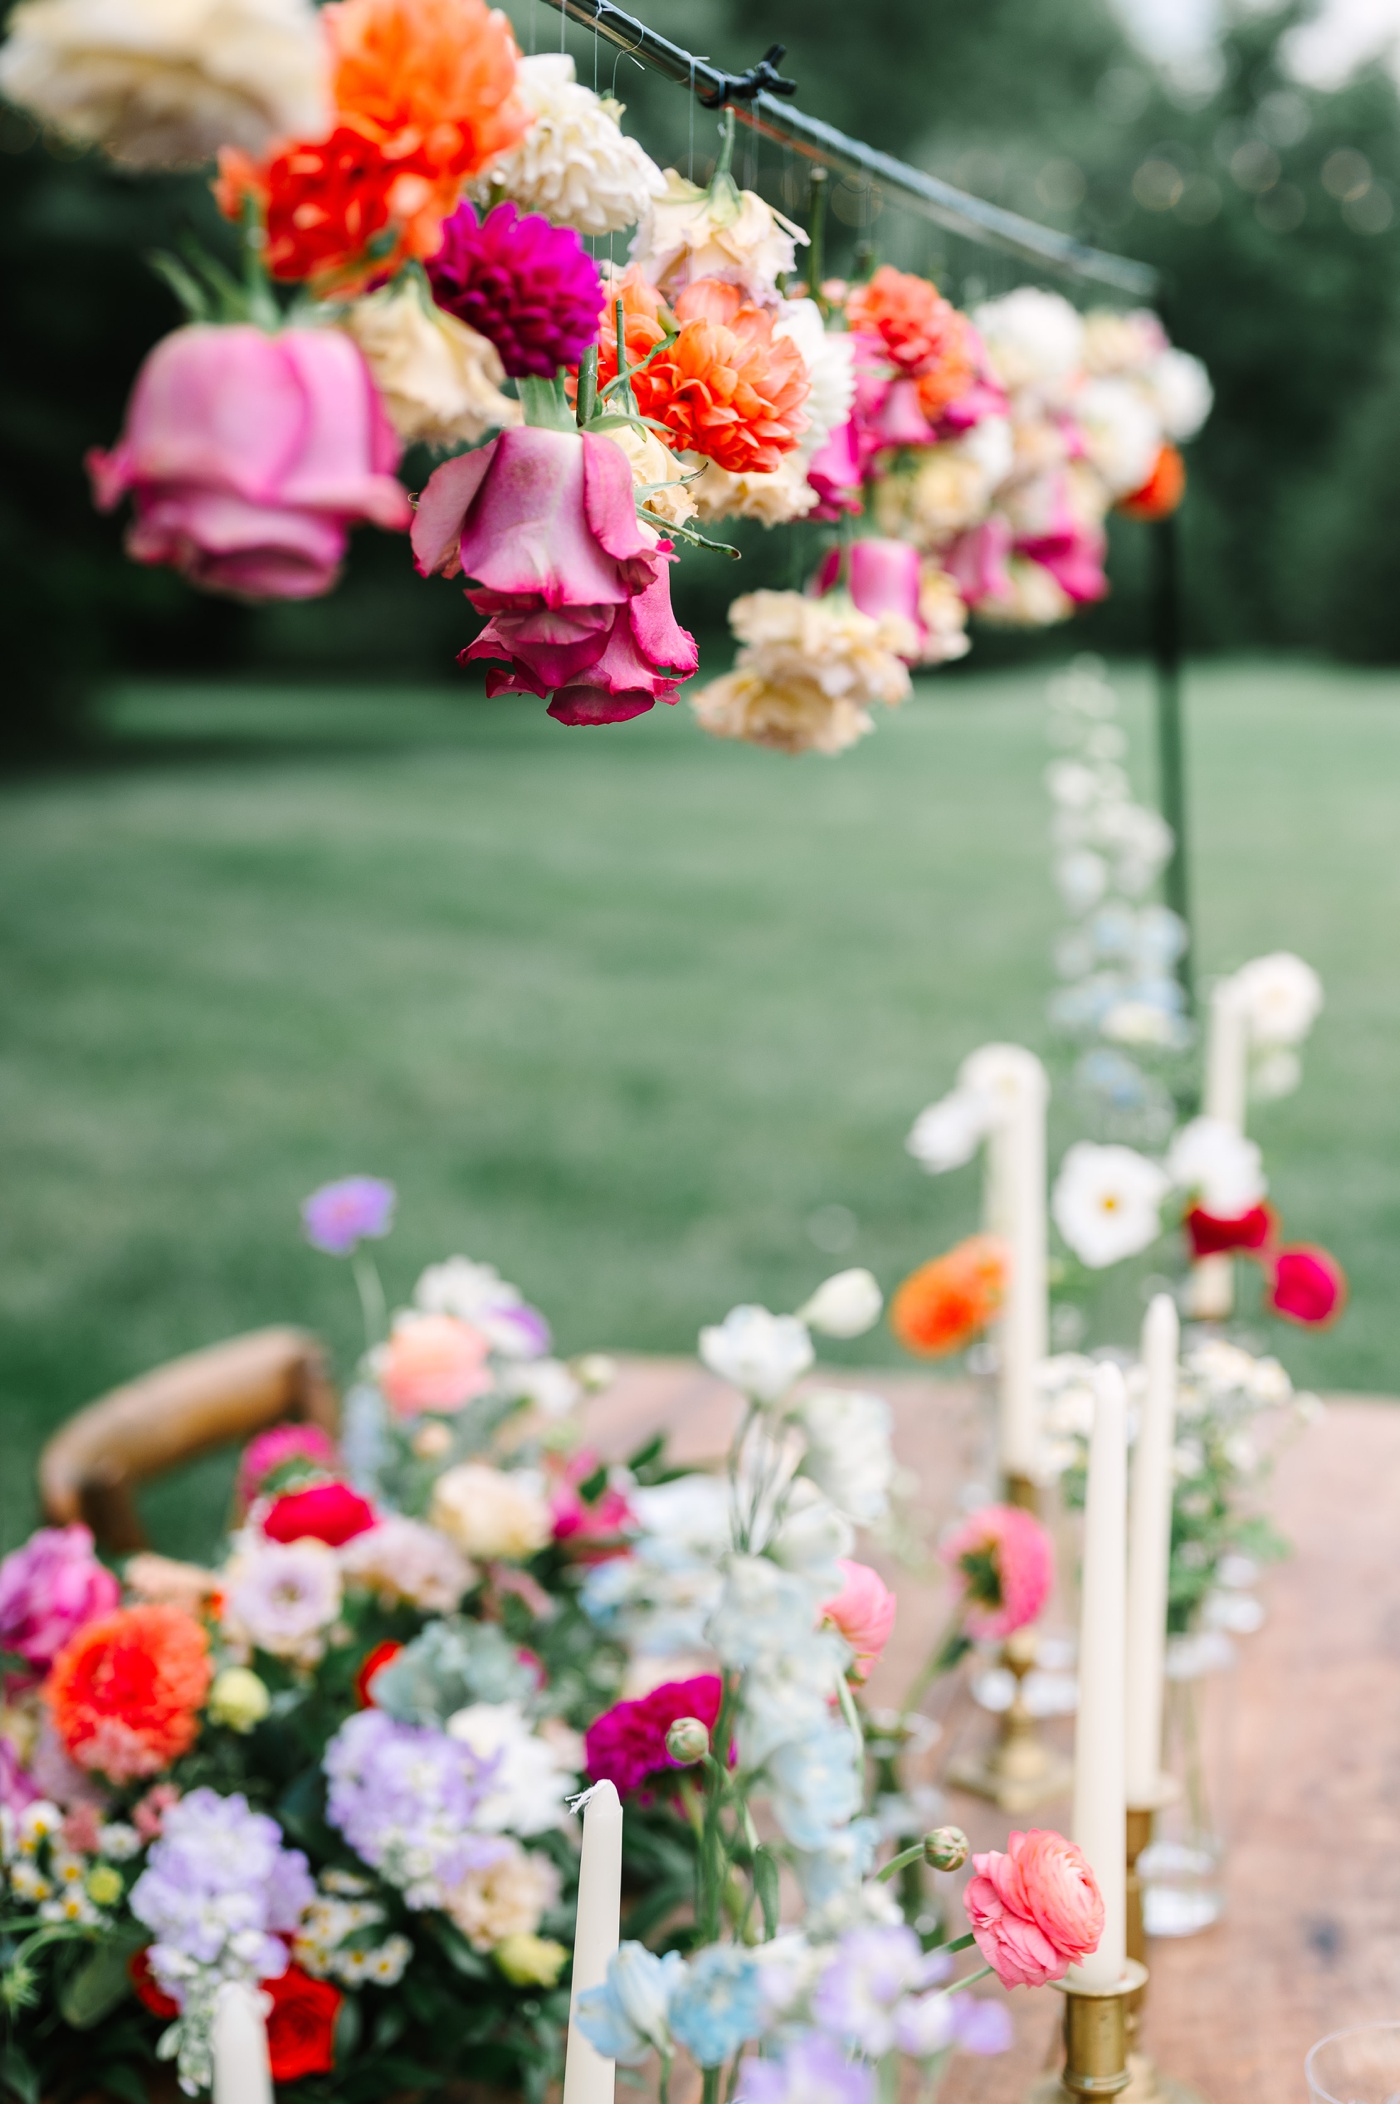 Pink and orange floral garland suspended above an outdoor table